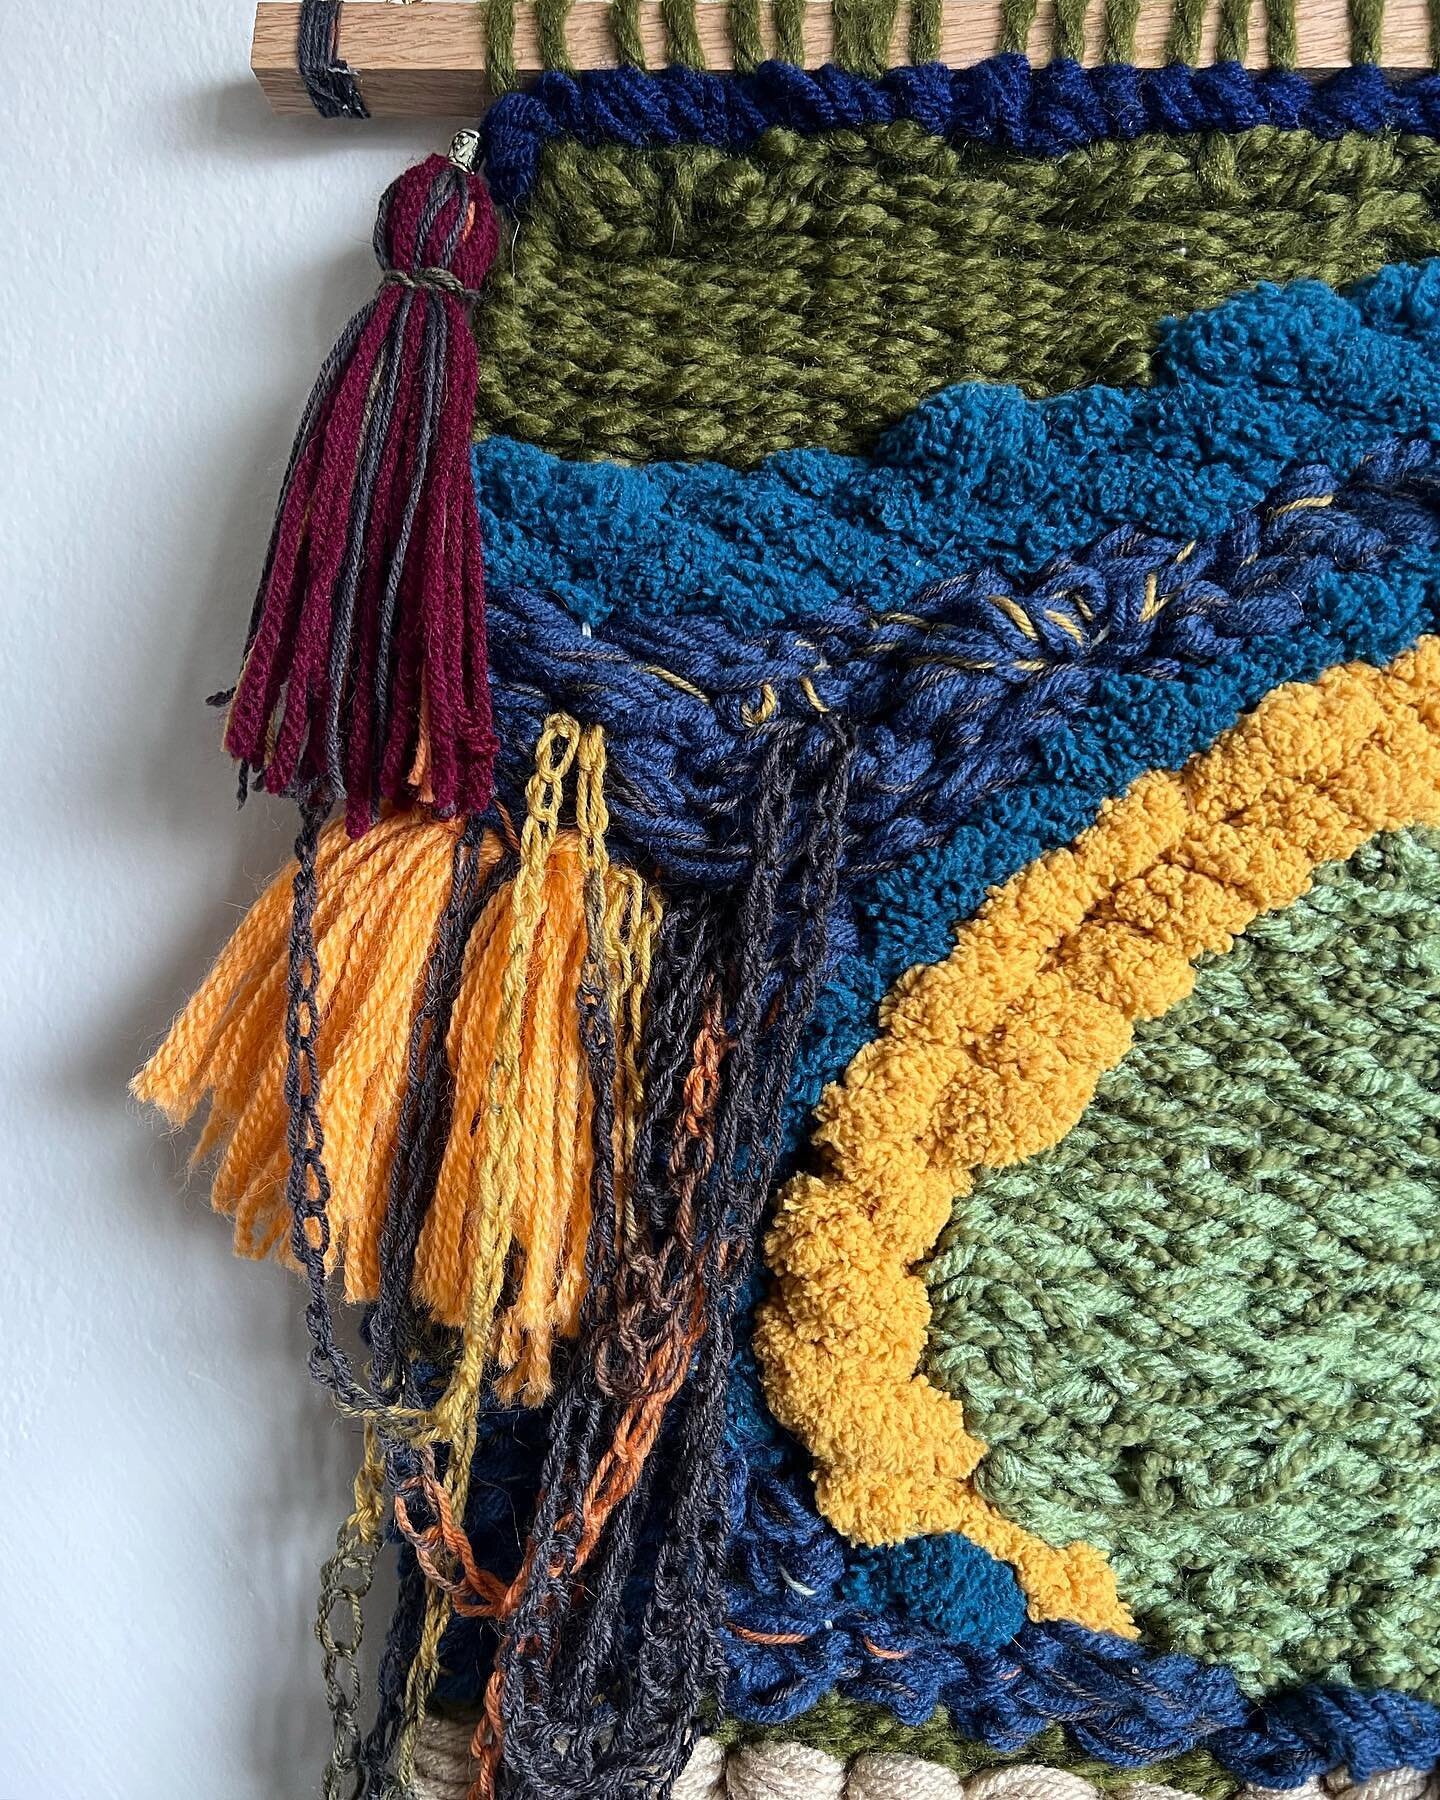 &ldquo;Movements&rdquo;.
18&rdquo; x 30&rdquo;.
Acrylic Yarn, Wool, Roving, Chenille. Oak.
2023. 

AVAILABLE

This piece is going to be displayed at the @sitarartscenter for their 13th Annual Juried Exhibition. The reception is on March 2nd 2023 at 7